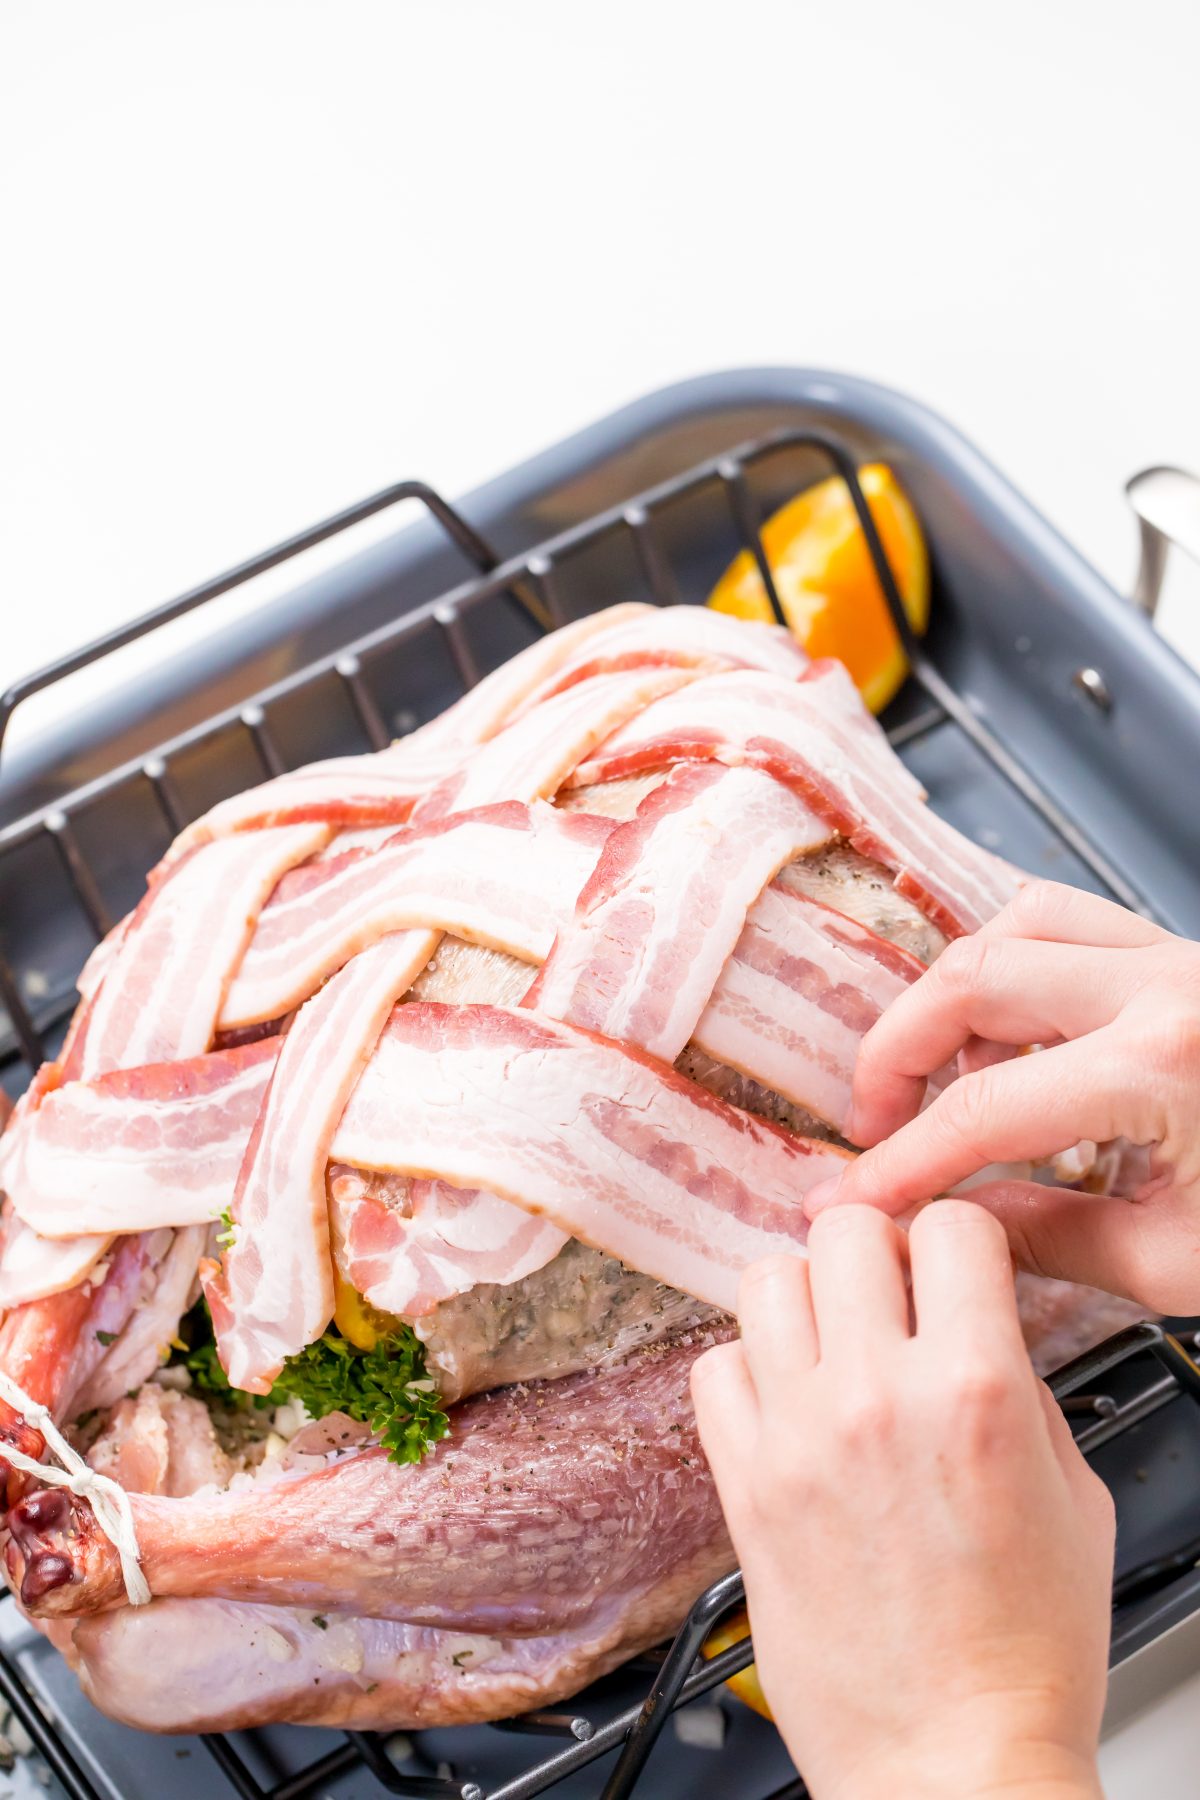 5D4B9083 - Bacon Wrapped Turkey - weaving 8 strips of bacon in a lattice pattern over the breast